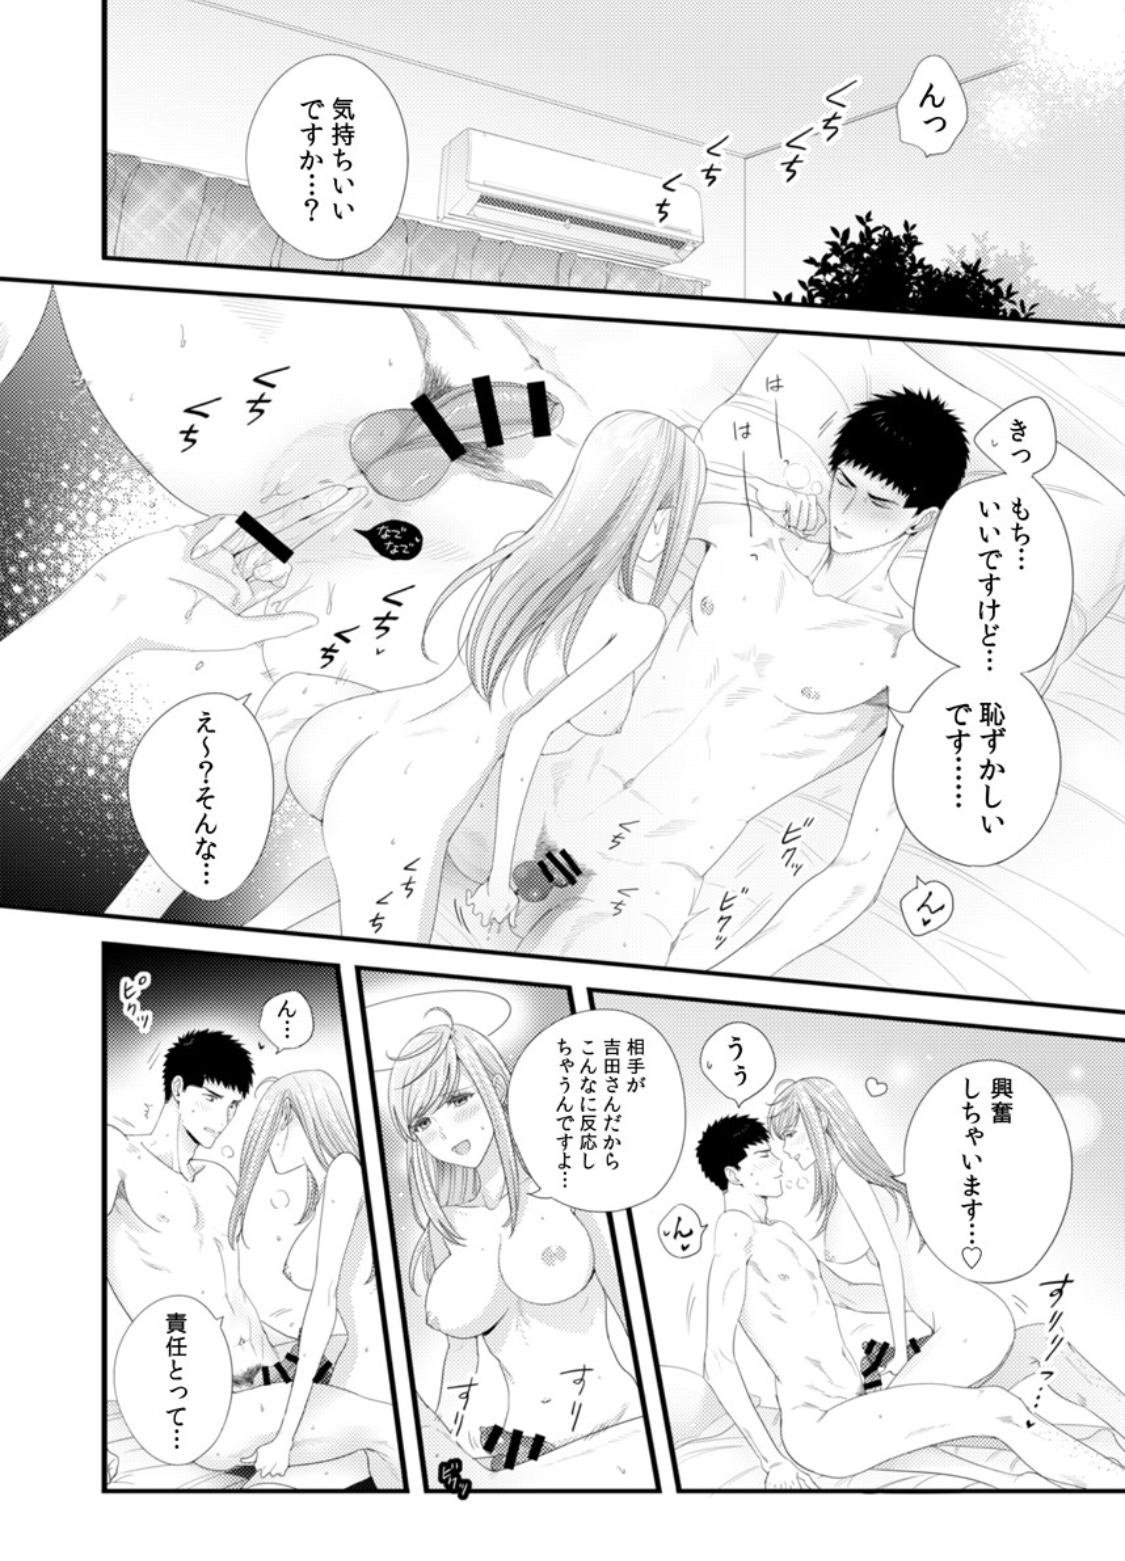 Please Let Me Hold You Futaba-San! Ch. 1-4 58